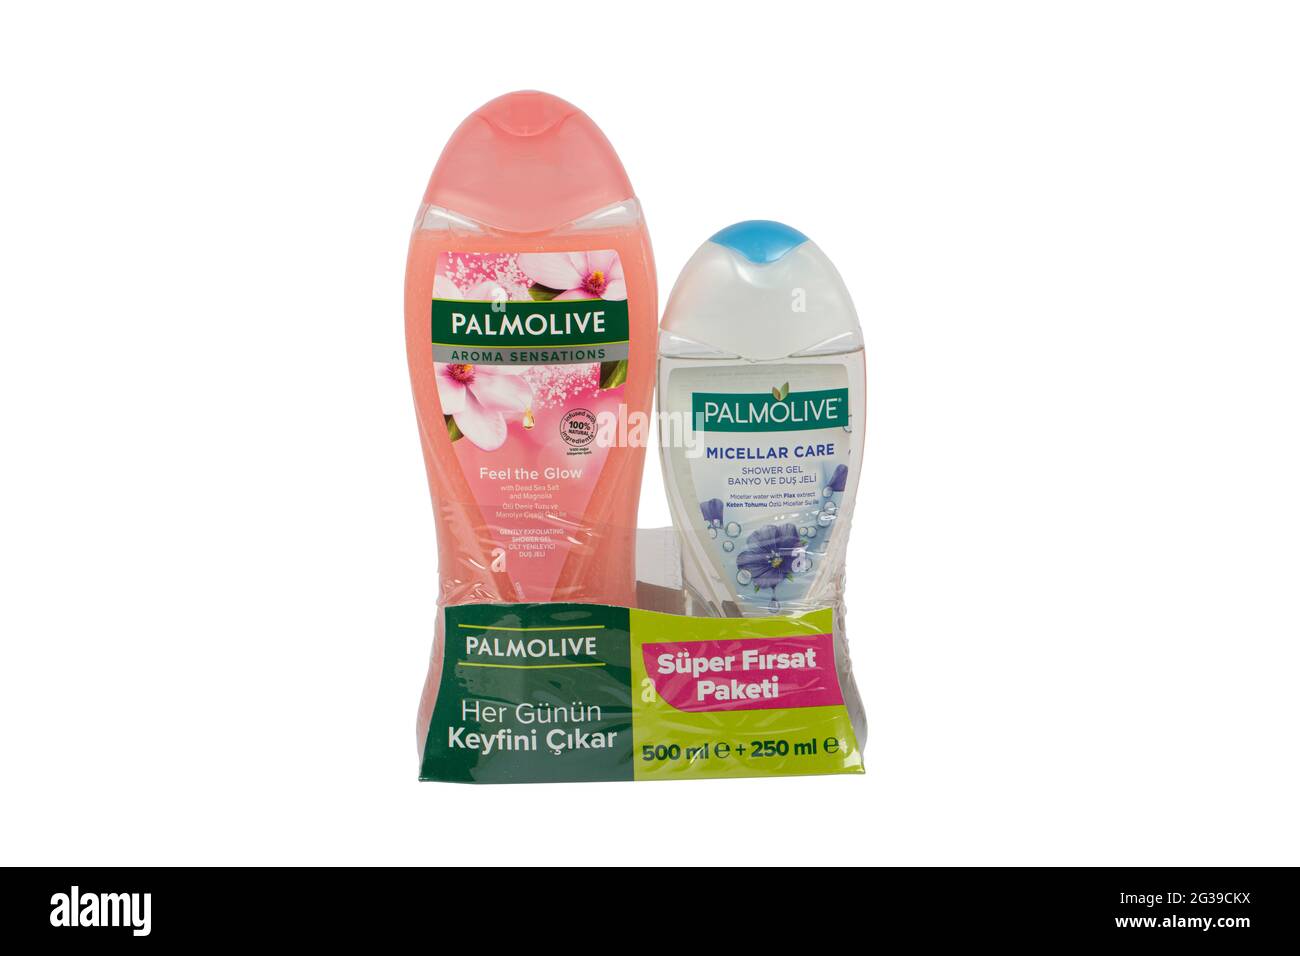 https://c8.alamy.com/comp/2G39CKX/istanbul-turkey-june-10-2021-palmolive-shower-gel-and-shampoo-products-of-palmolive-cosmetics-trademark-manufactured-by-american-company-colgat-2G39CKX.jpg